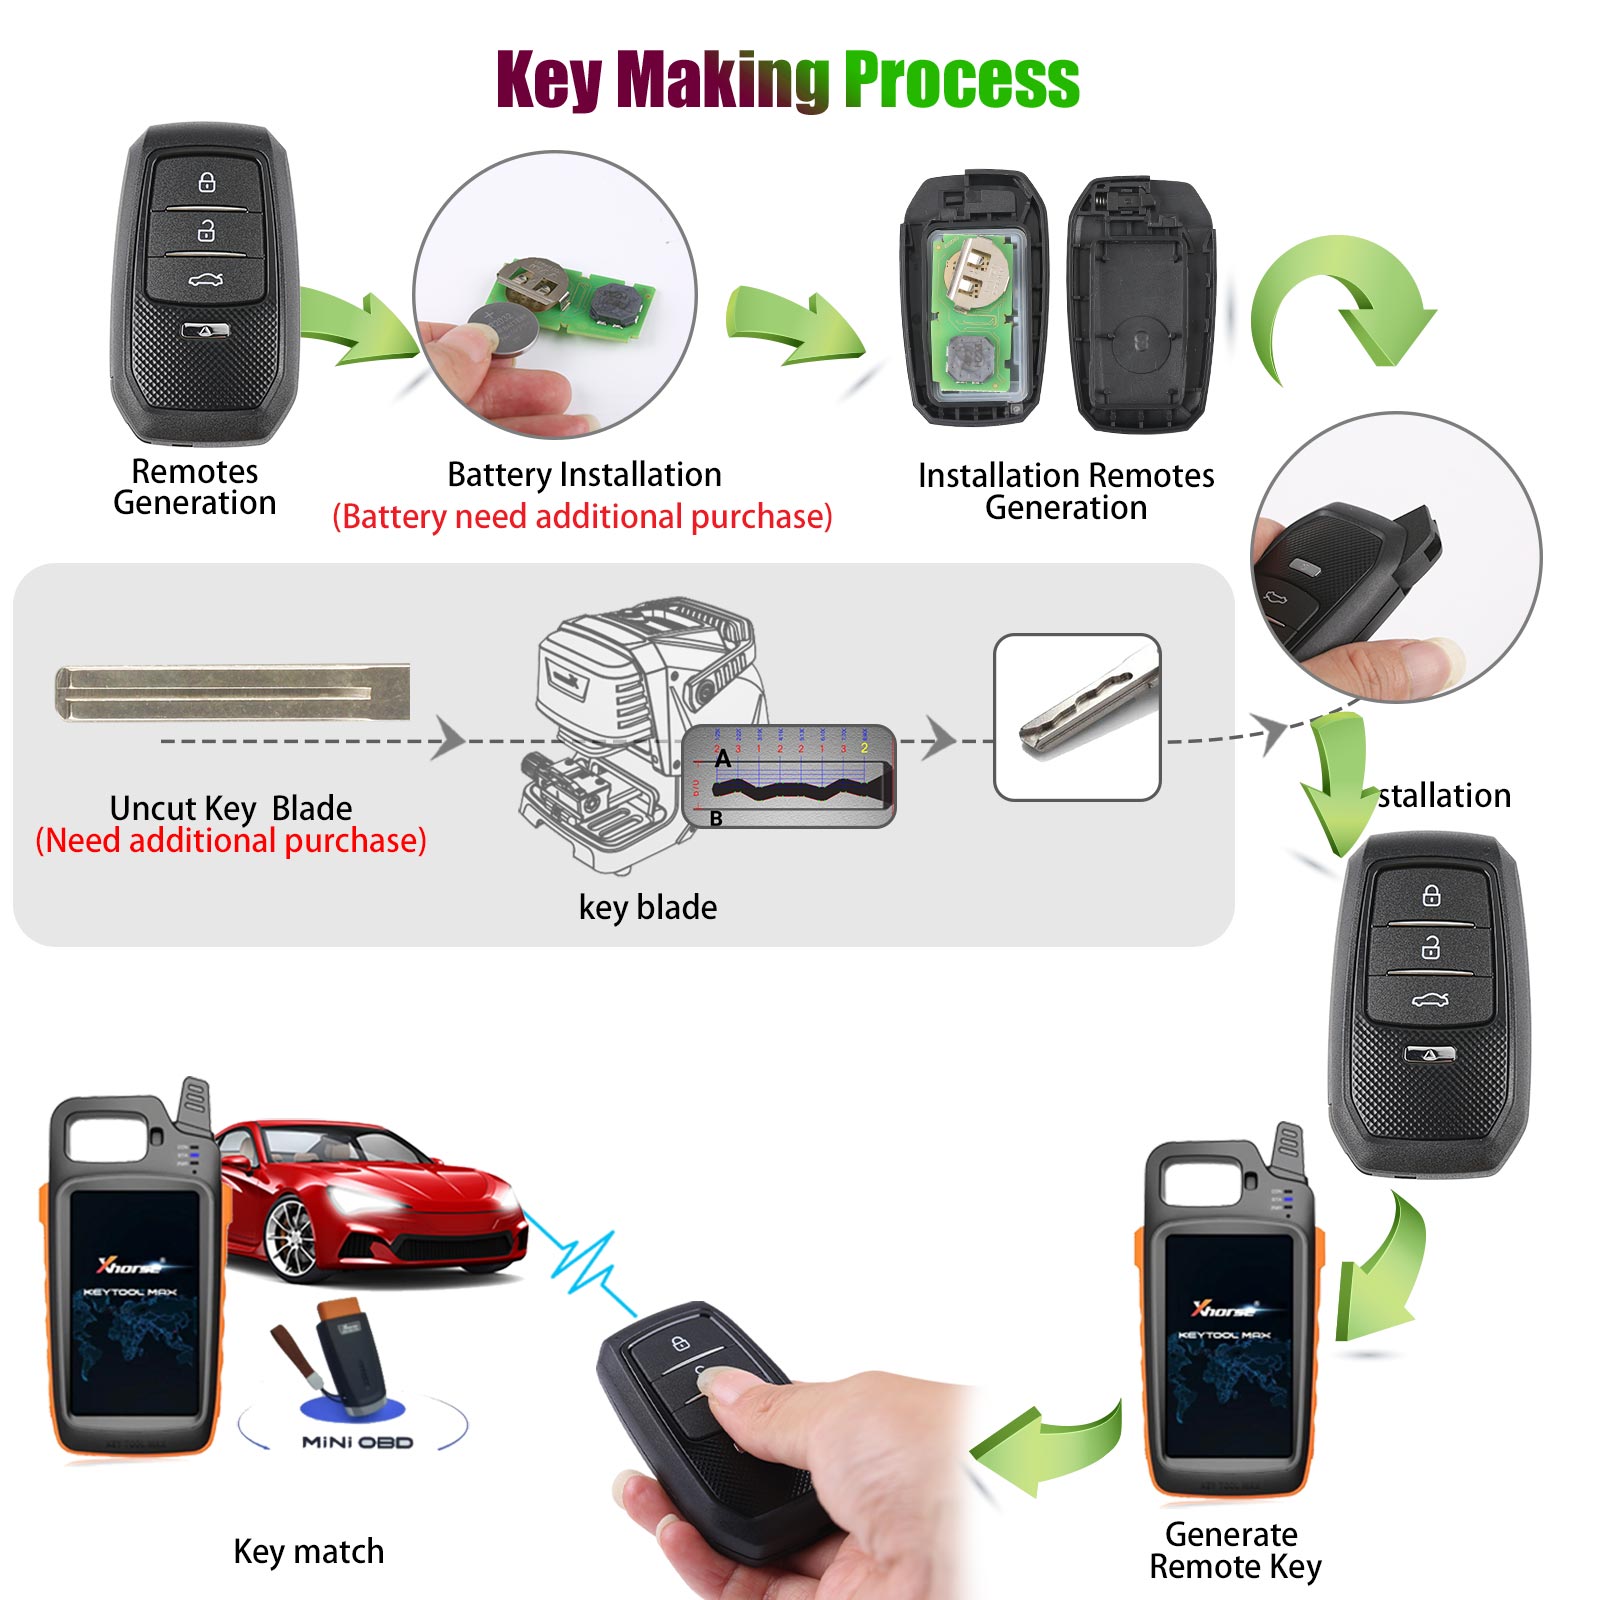 Xhorse XSTO01EN TOY.T Smart Key for Toyota XM38 with Key Shell 